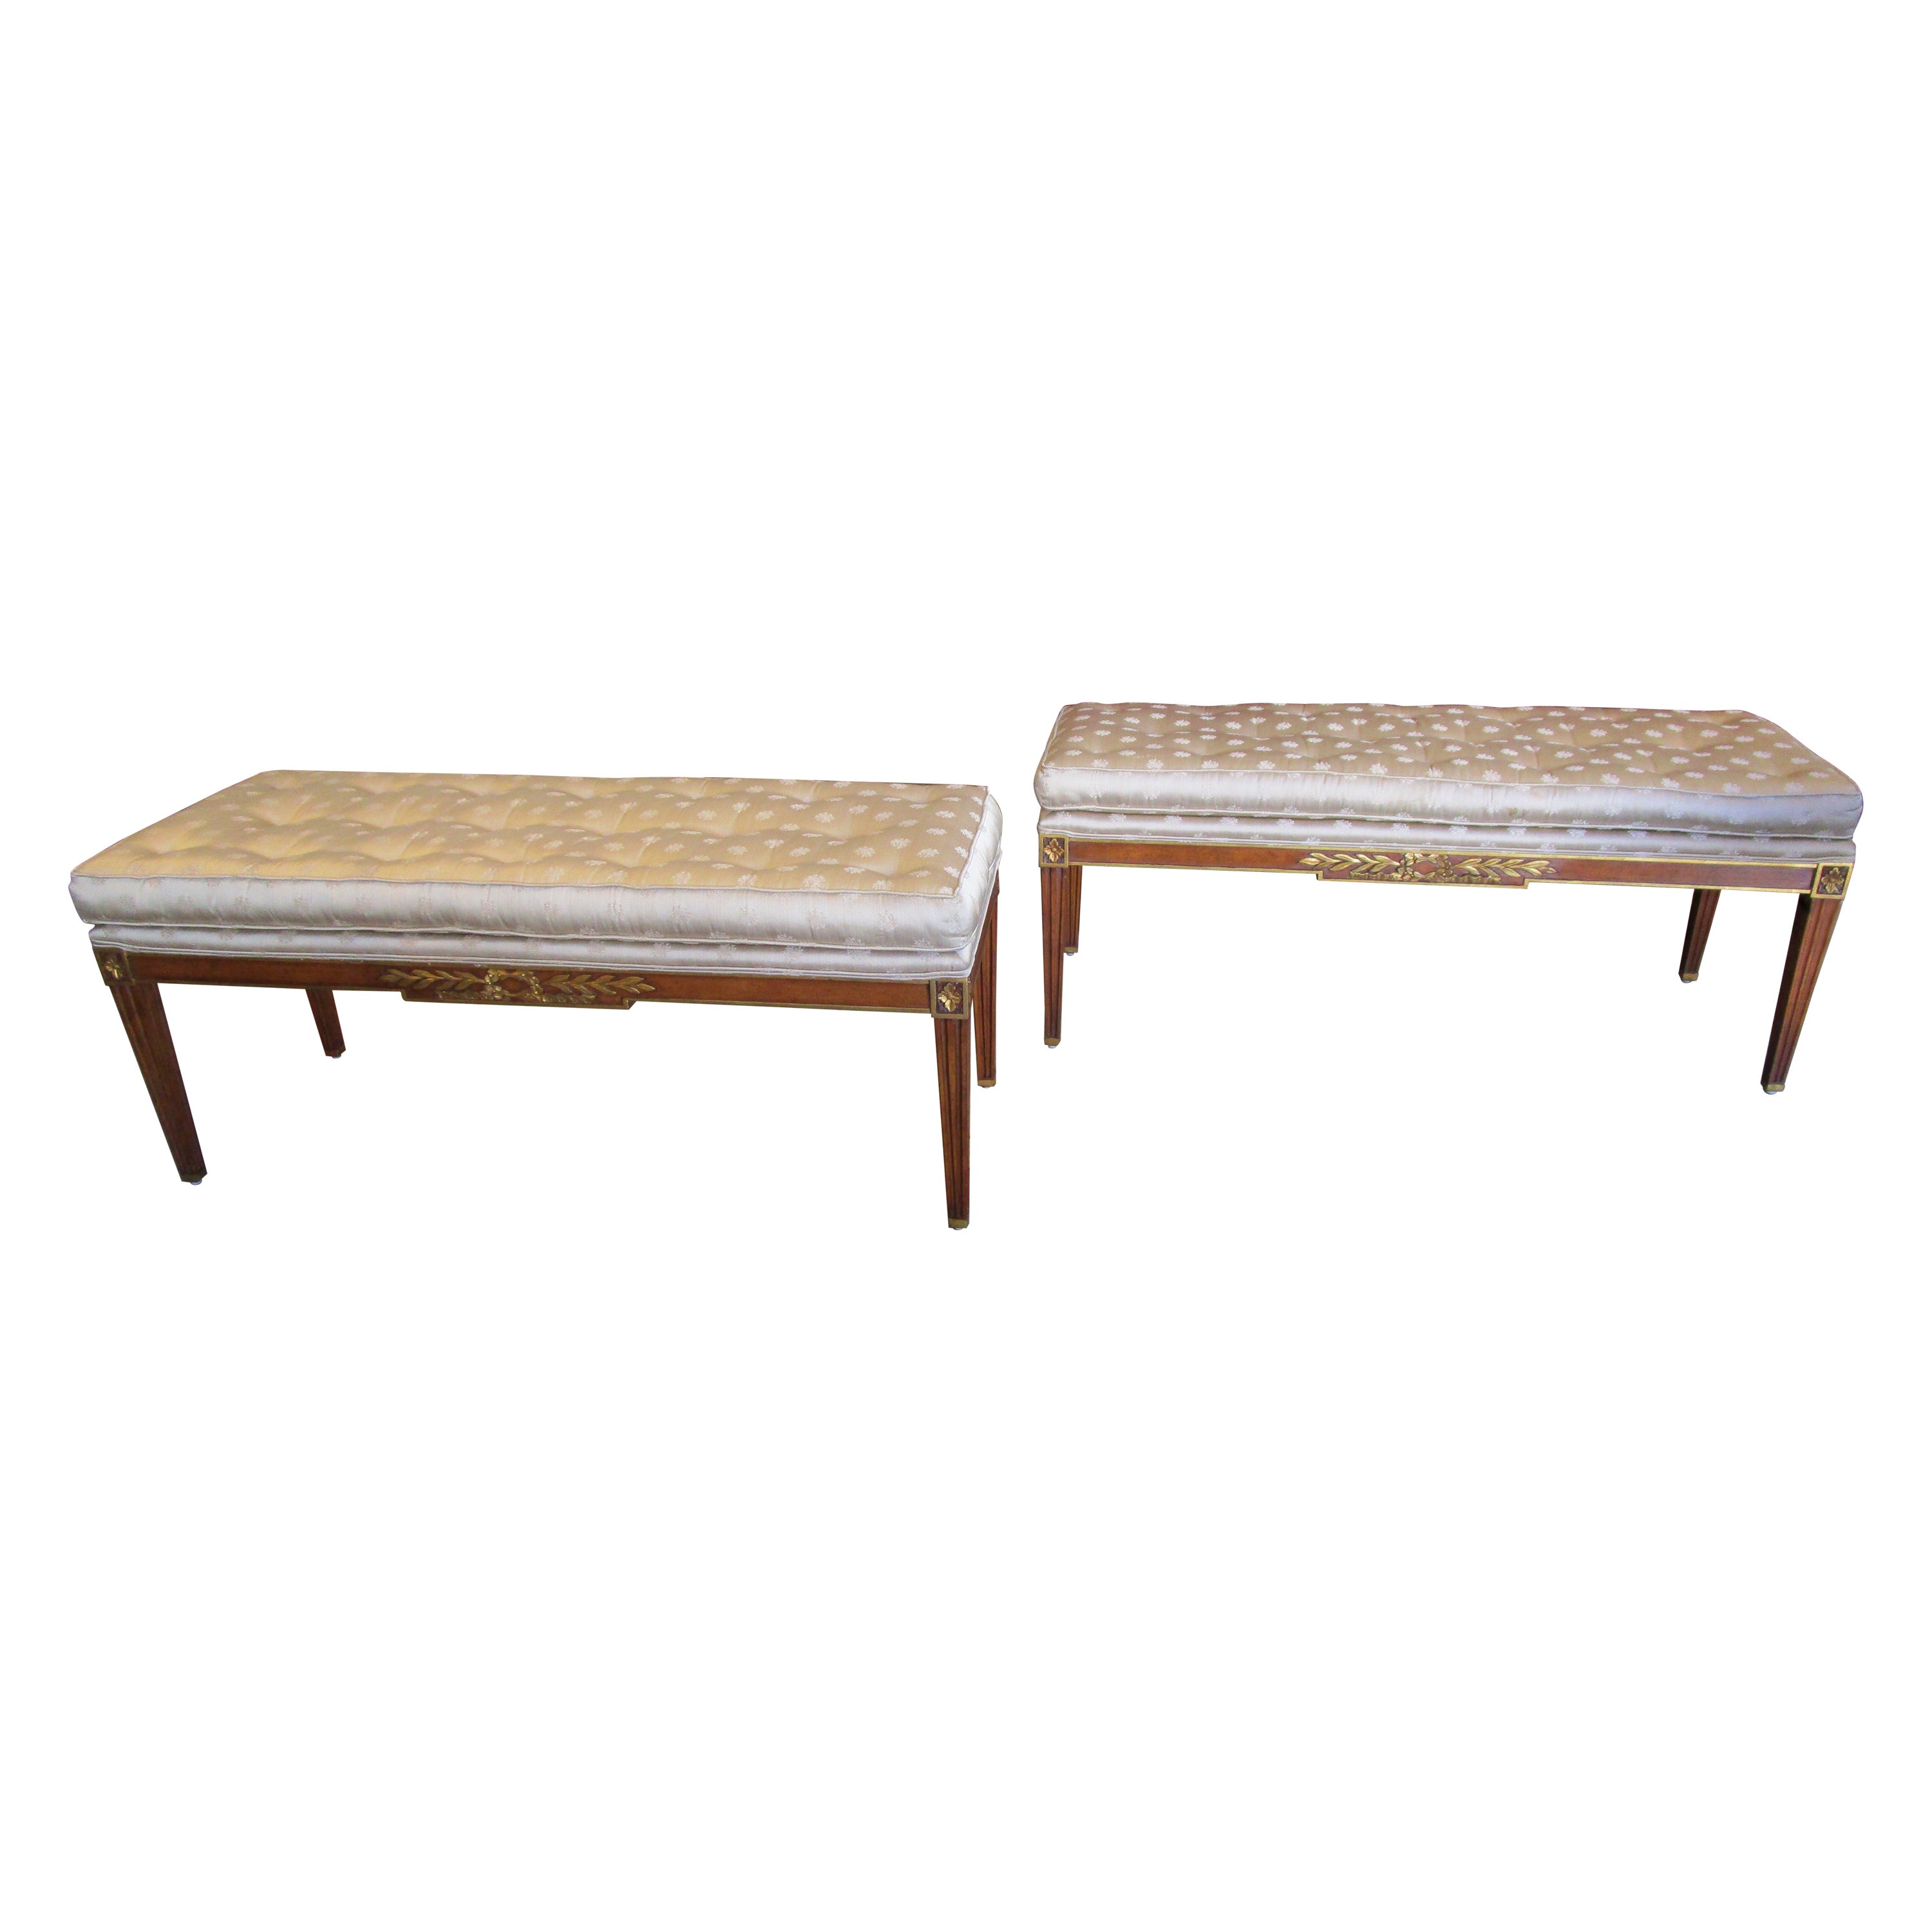 Fine Pair of Late 19th Century to Early 20th C Empire Parcel Gilt Benches For Sale